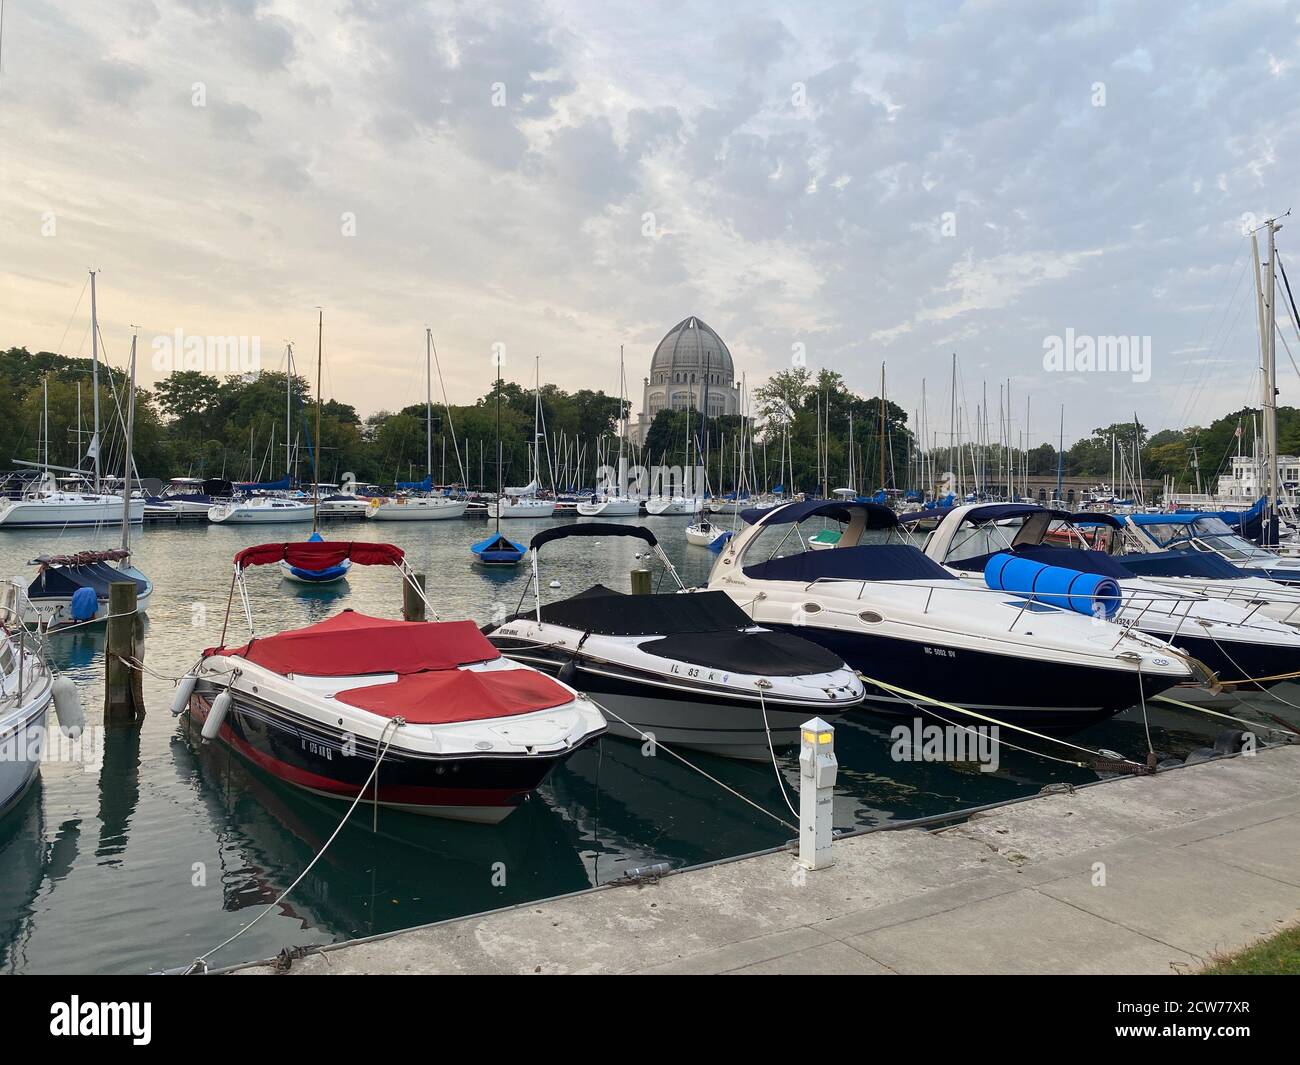 Boats docked in Wilmette Harbor on Lake Michigan with the Baha'i House of Worship in the background Stock Photo